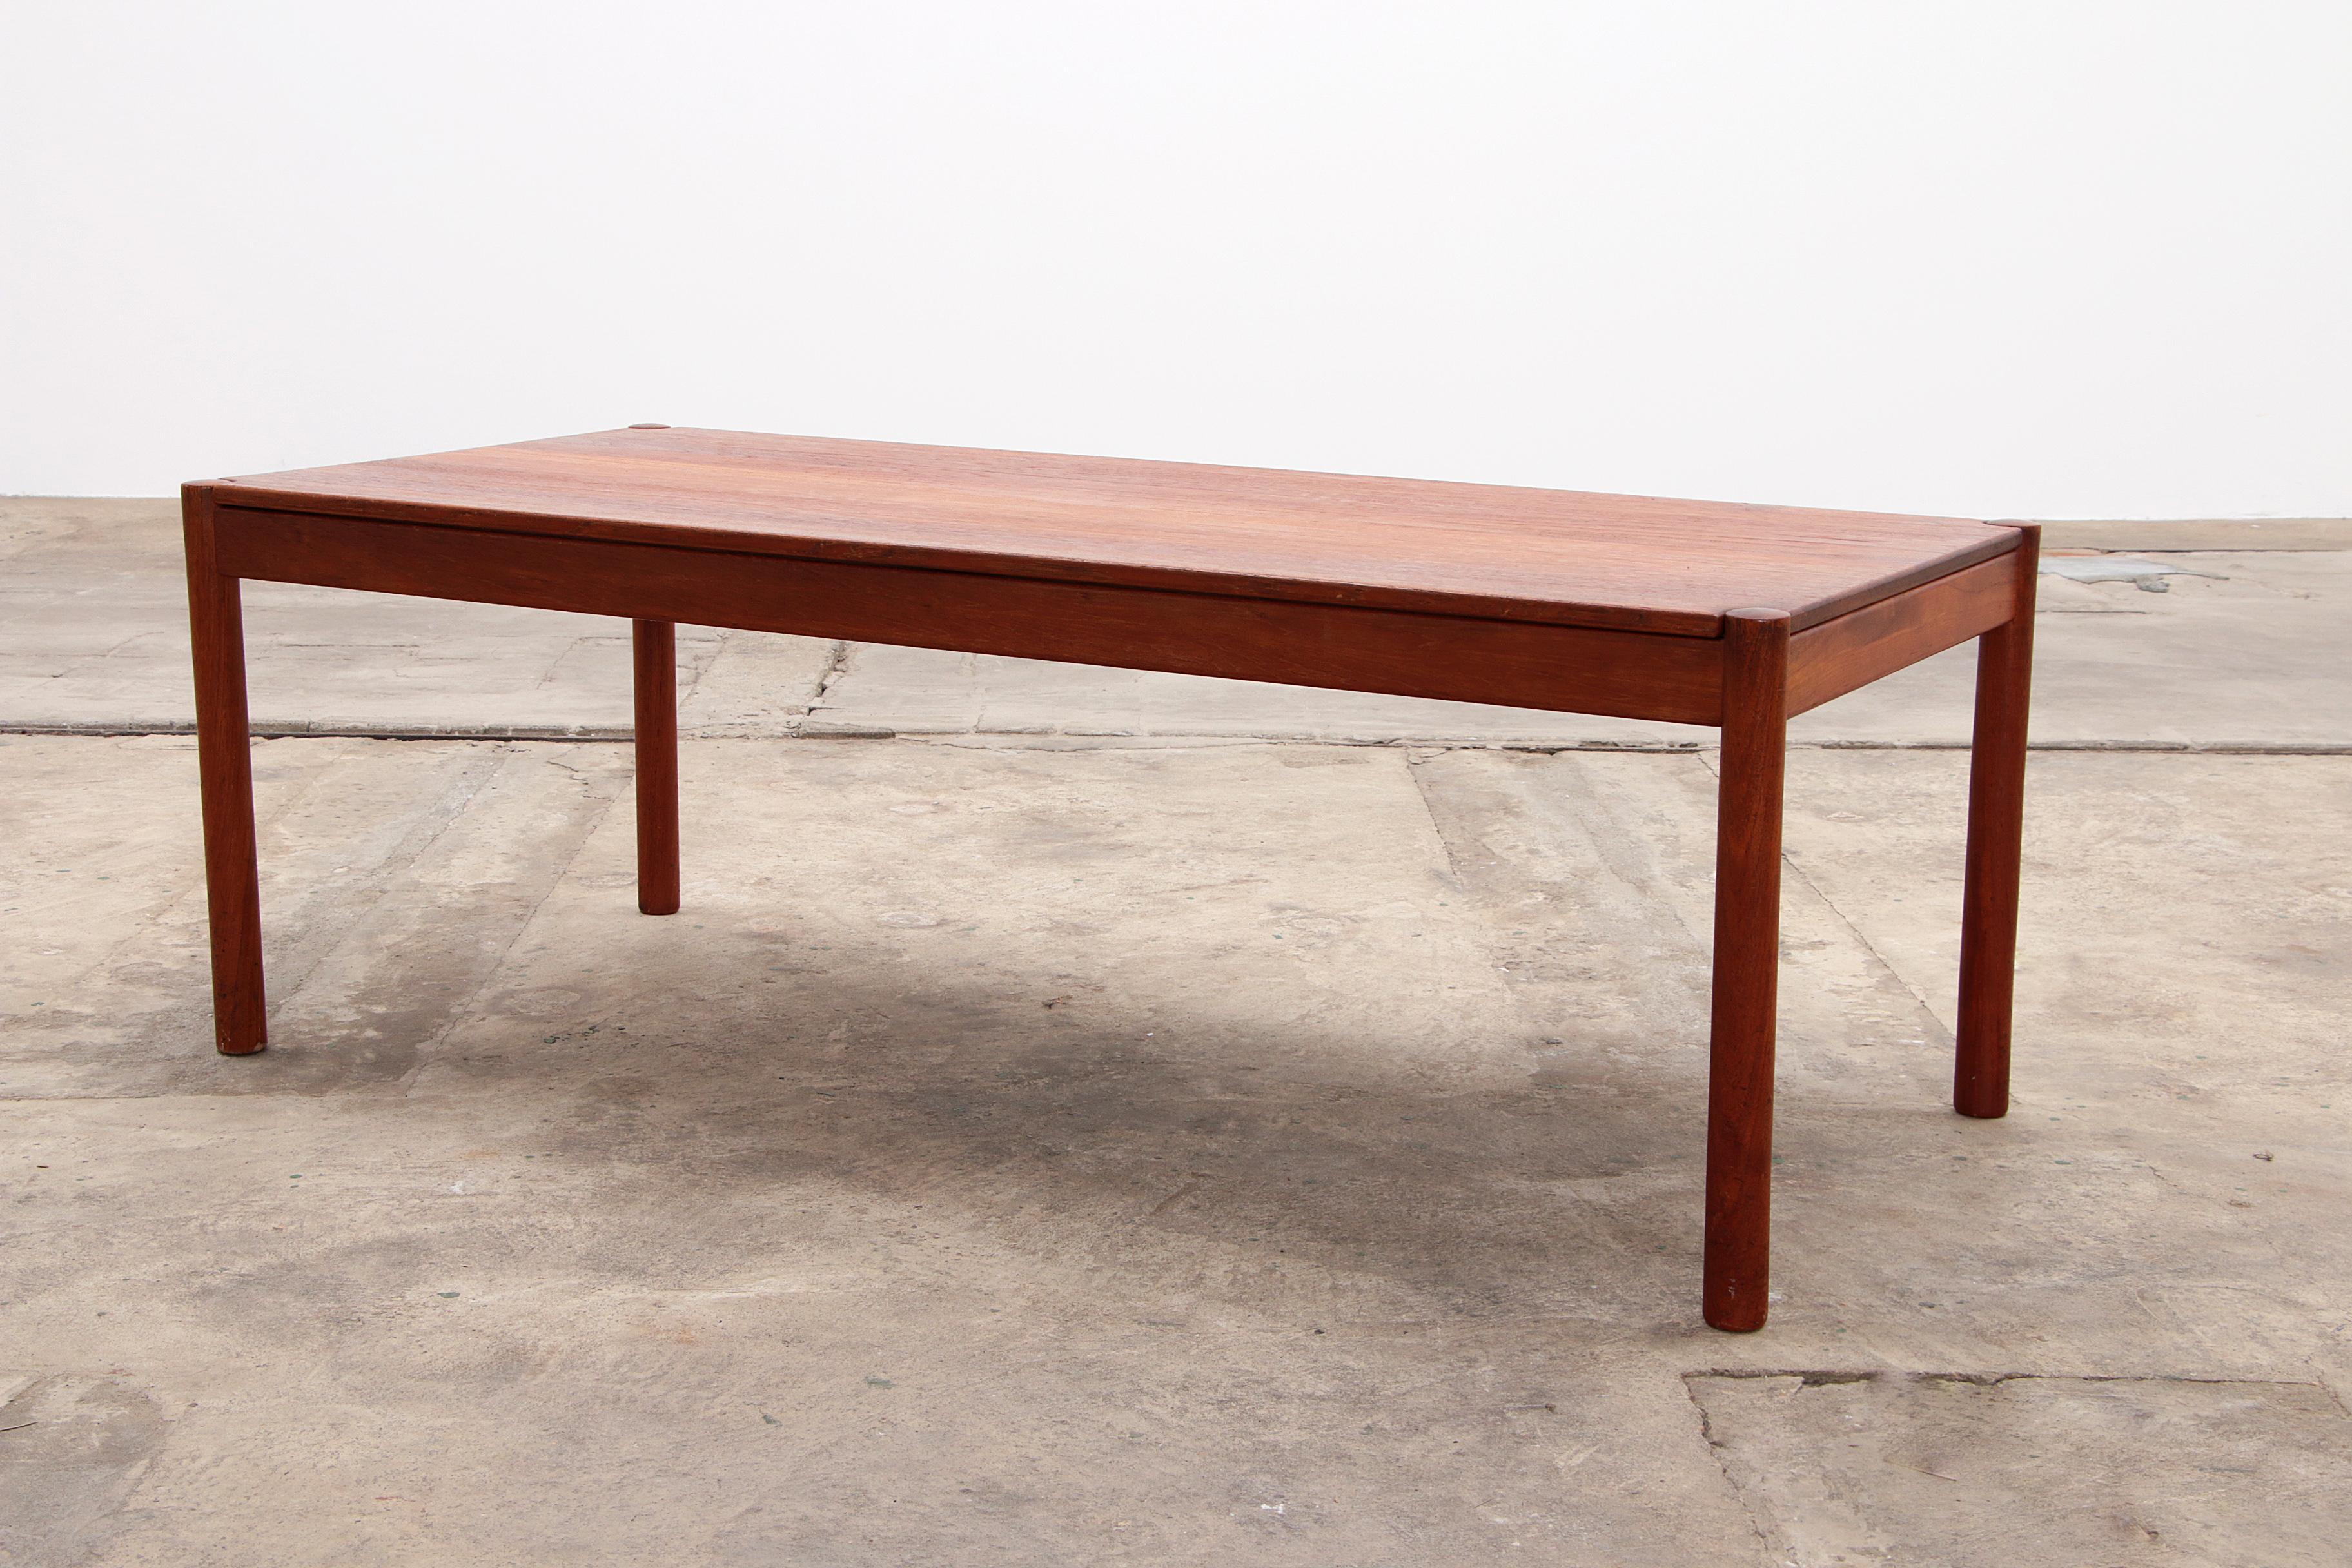 Large coffee table by Magnus Olesen Danish


This is a beautiful timeless coffee table designed by Magnus Olesen, a Danish designer.

Nice sleek model that will suit many interiors.

Made in the period 1960-1969

The previous owner removed